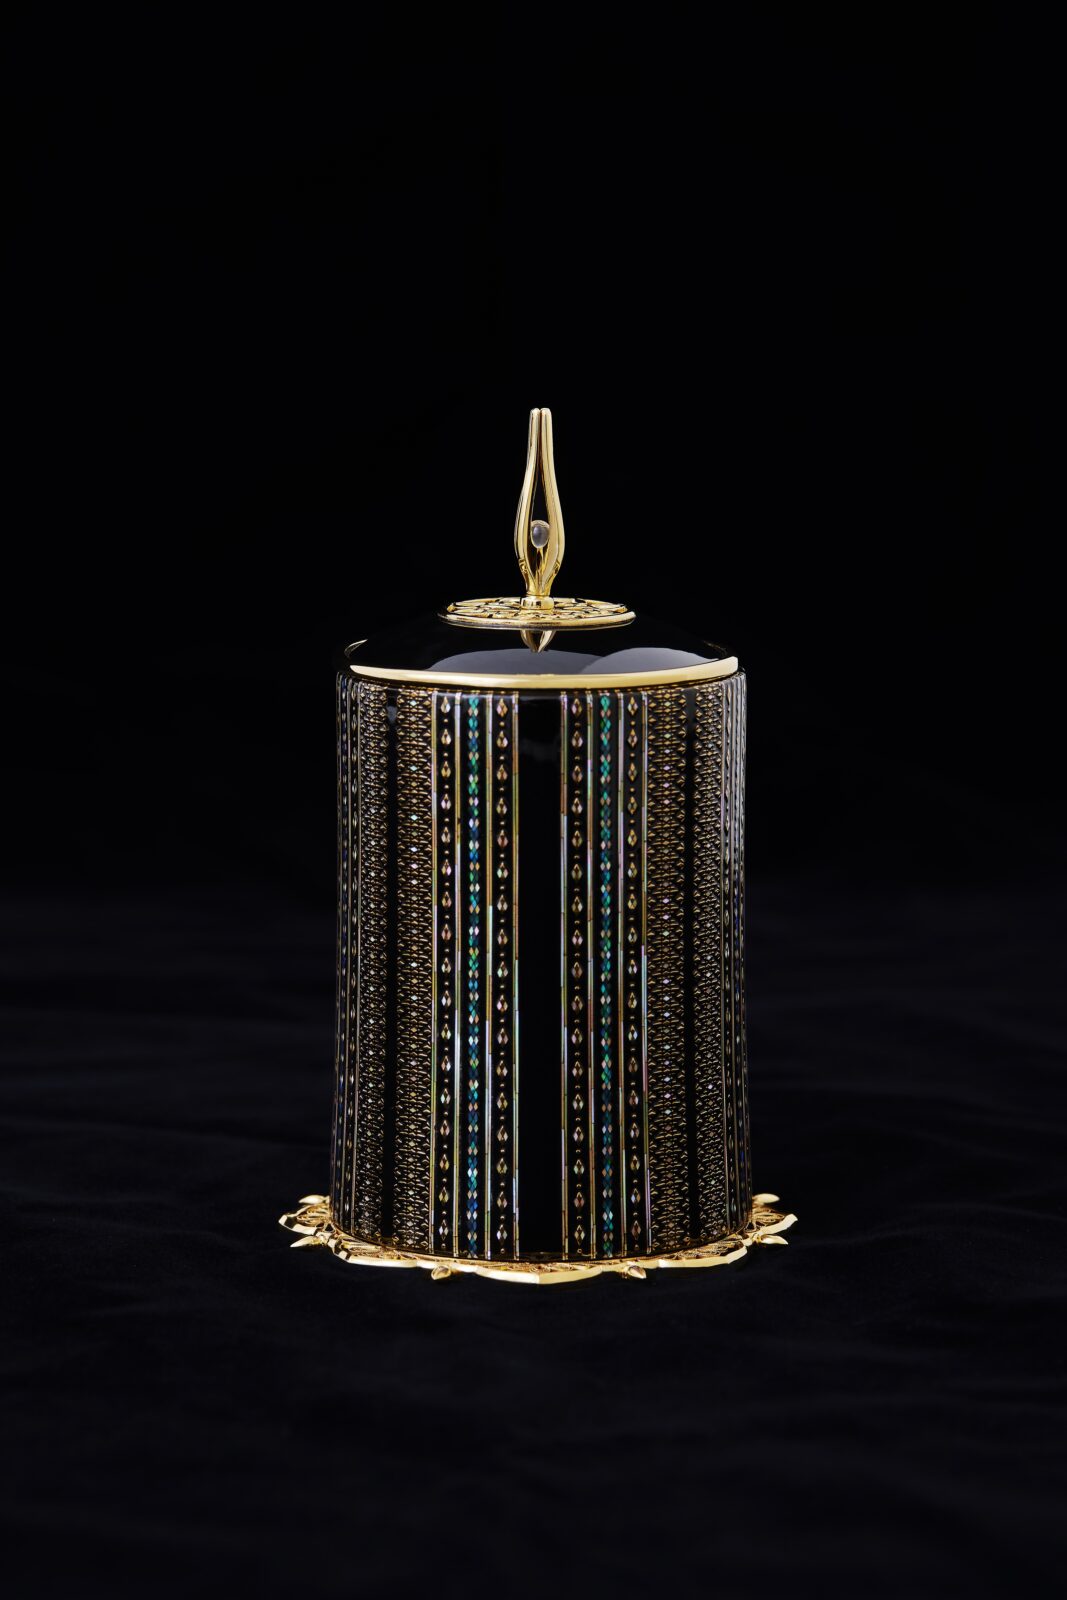 Incense Burner with Inlaid Gold and Mother-of-pearl, “Brilliant Rays”